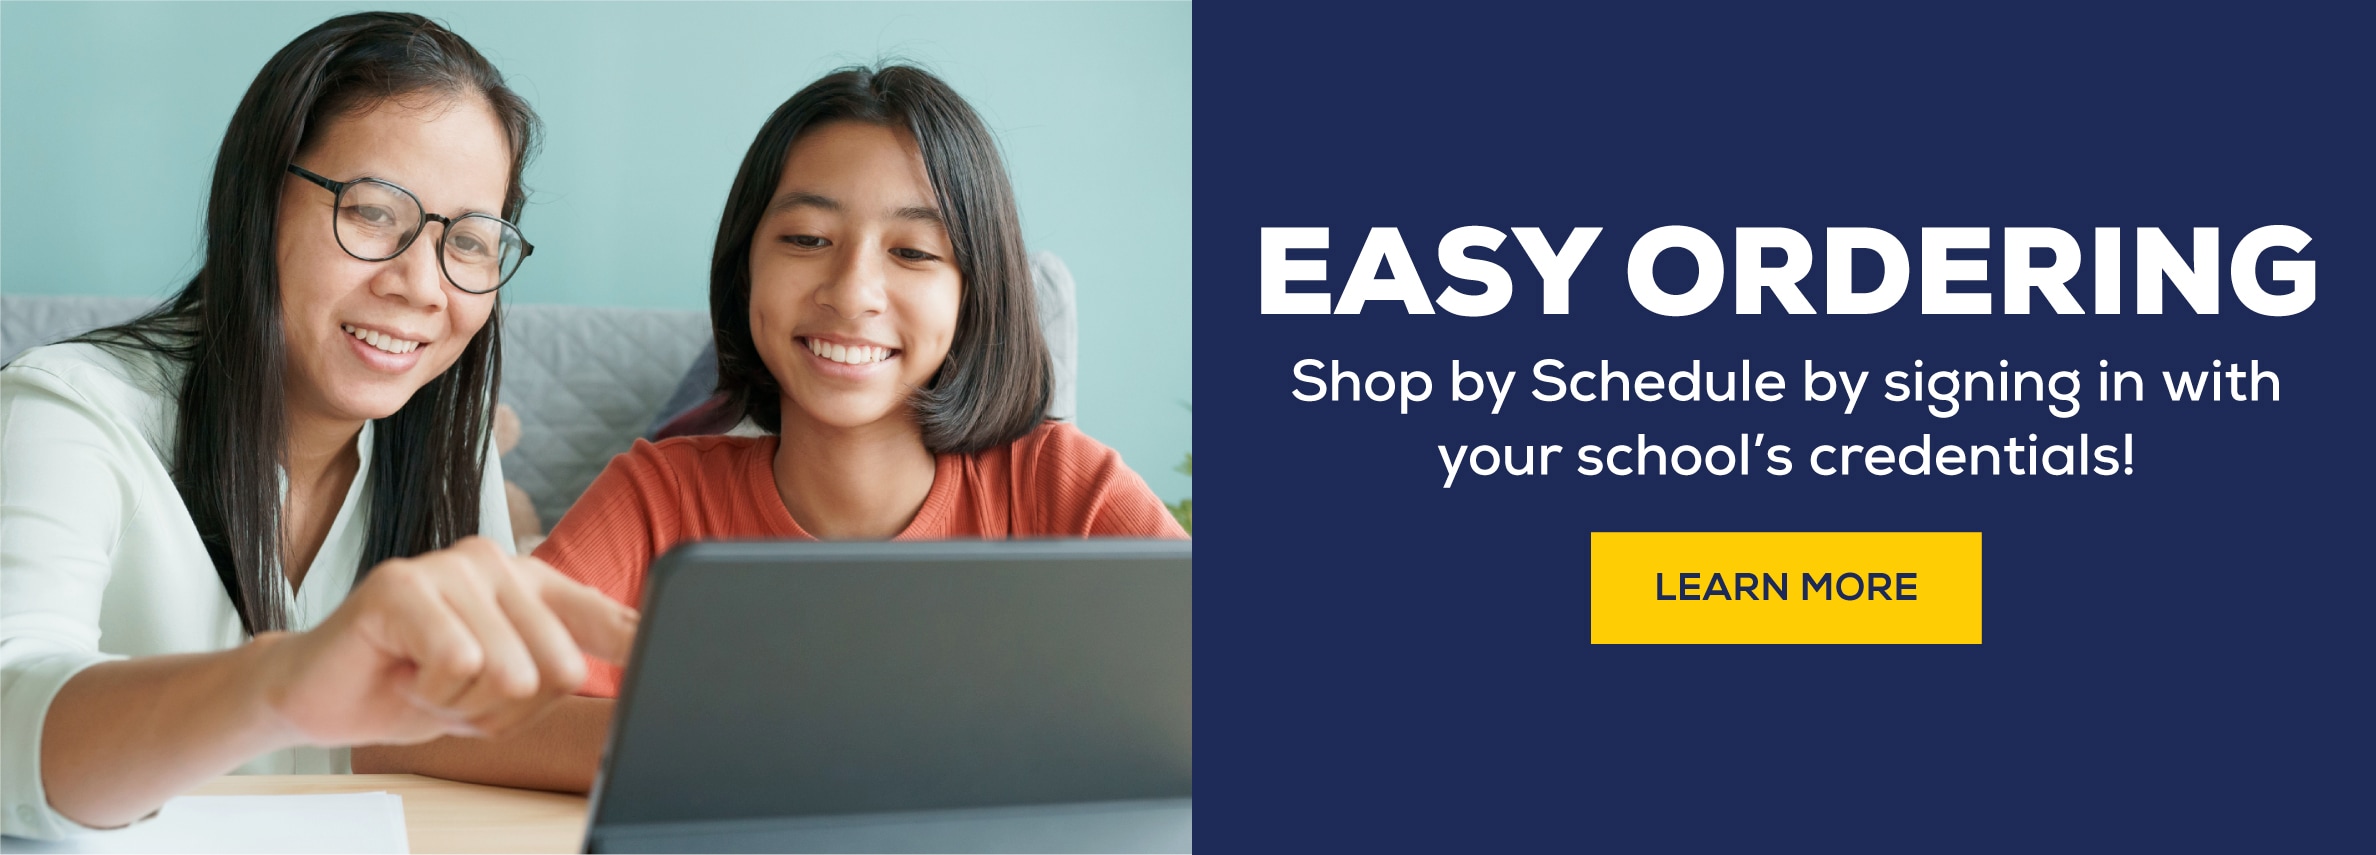 Easy Ordering. Shop by schedule by signing in with your schools credentials. Learn more.